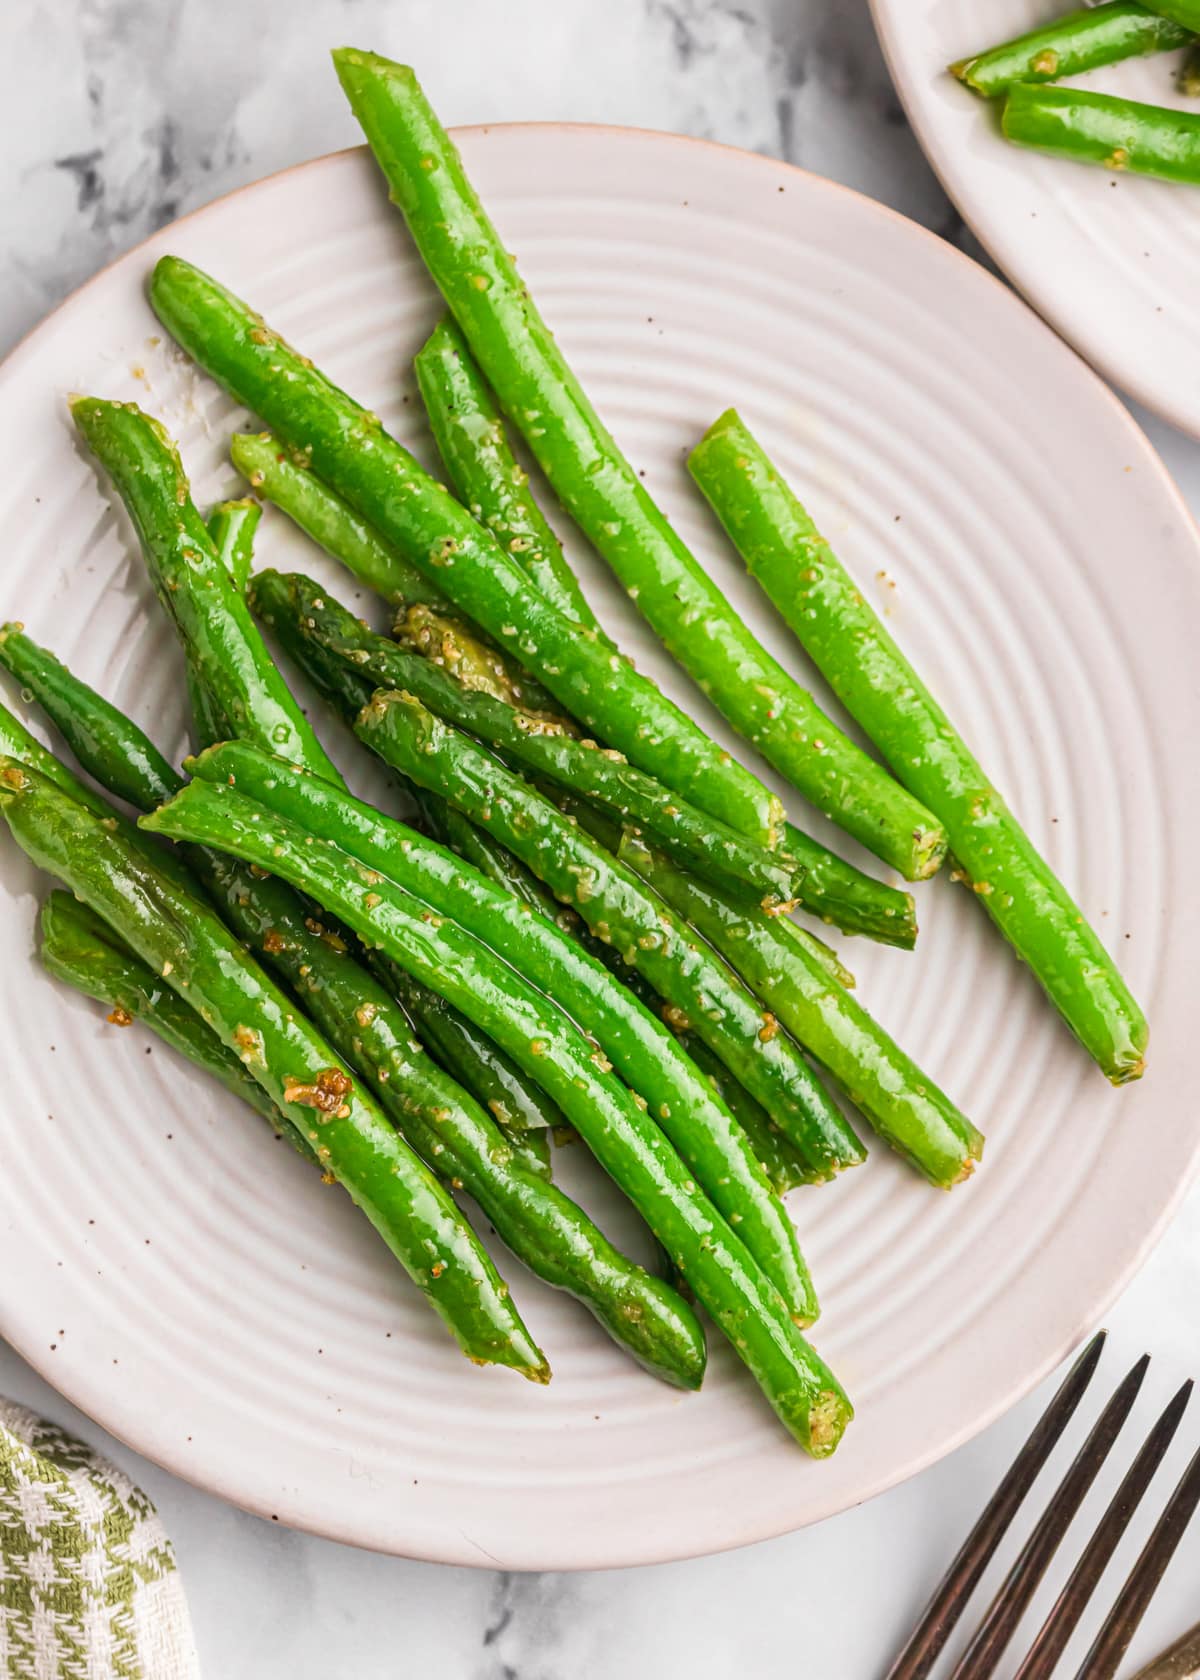 A close up of sauteed green beans on a white plate.